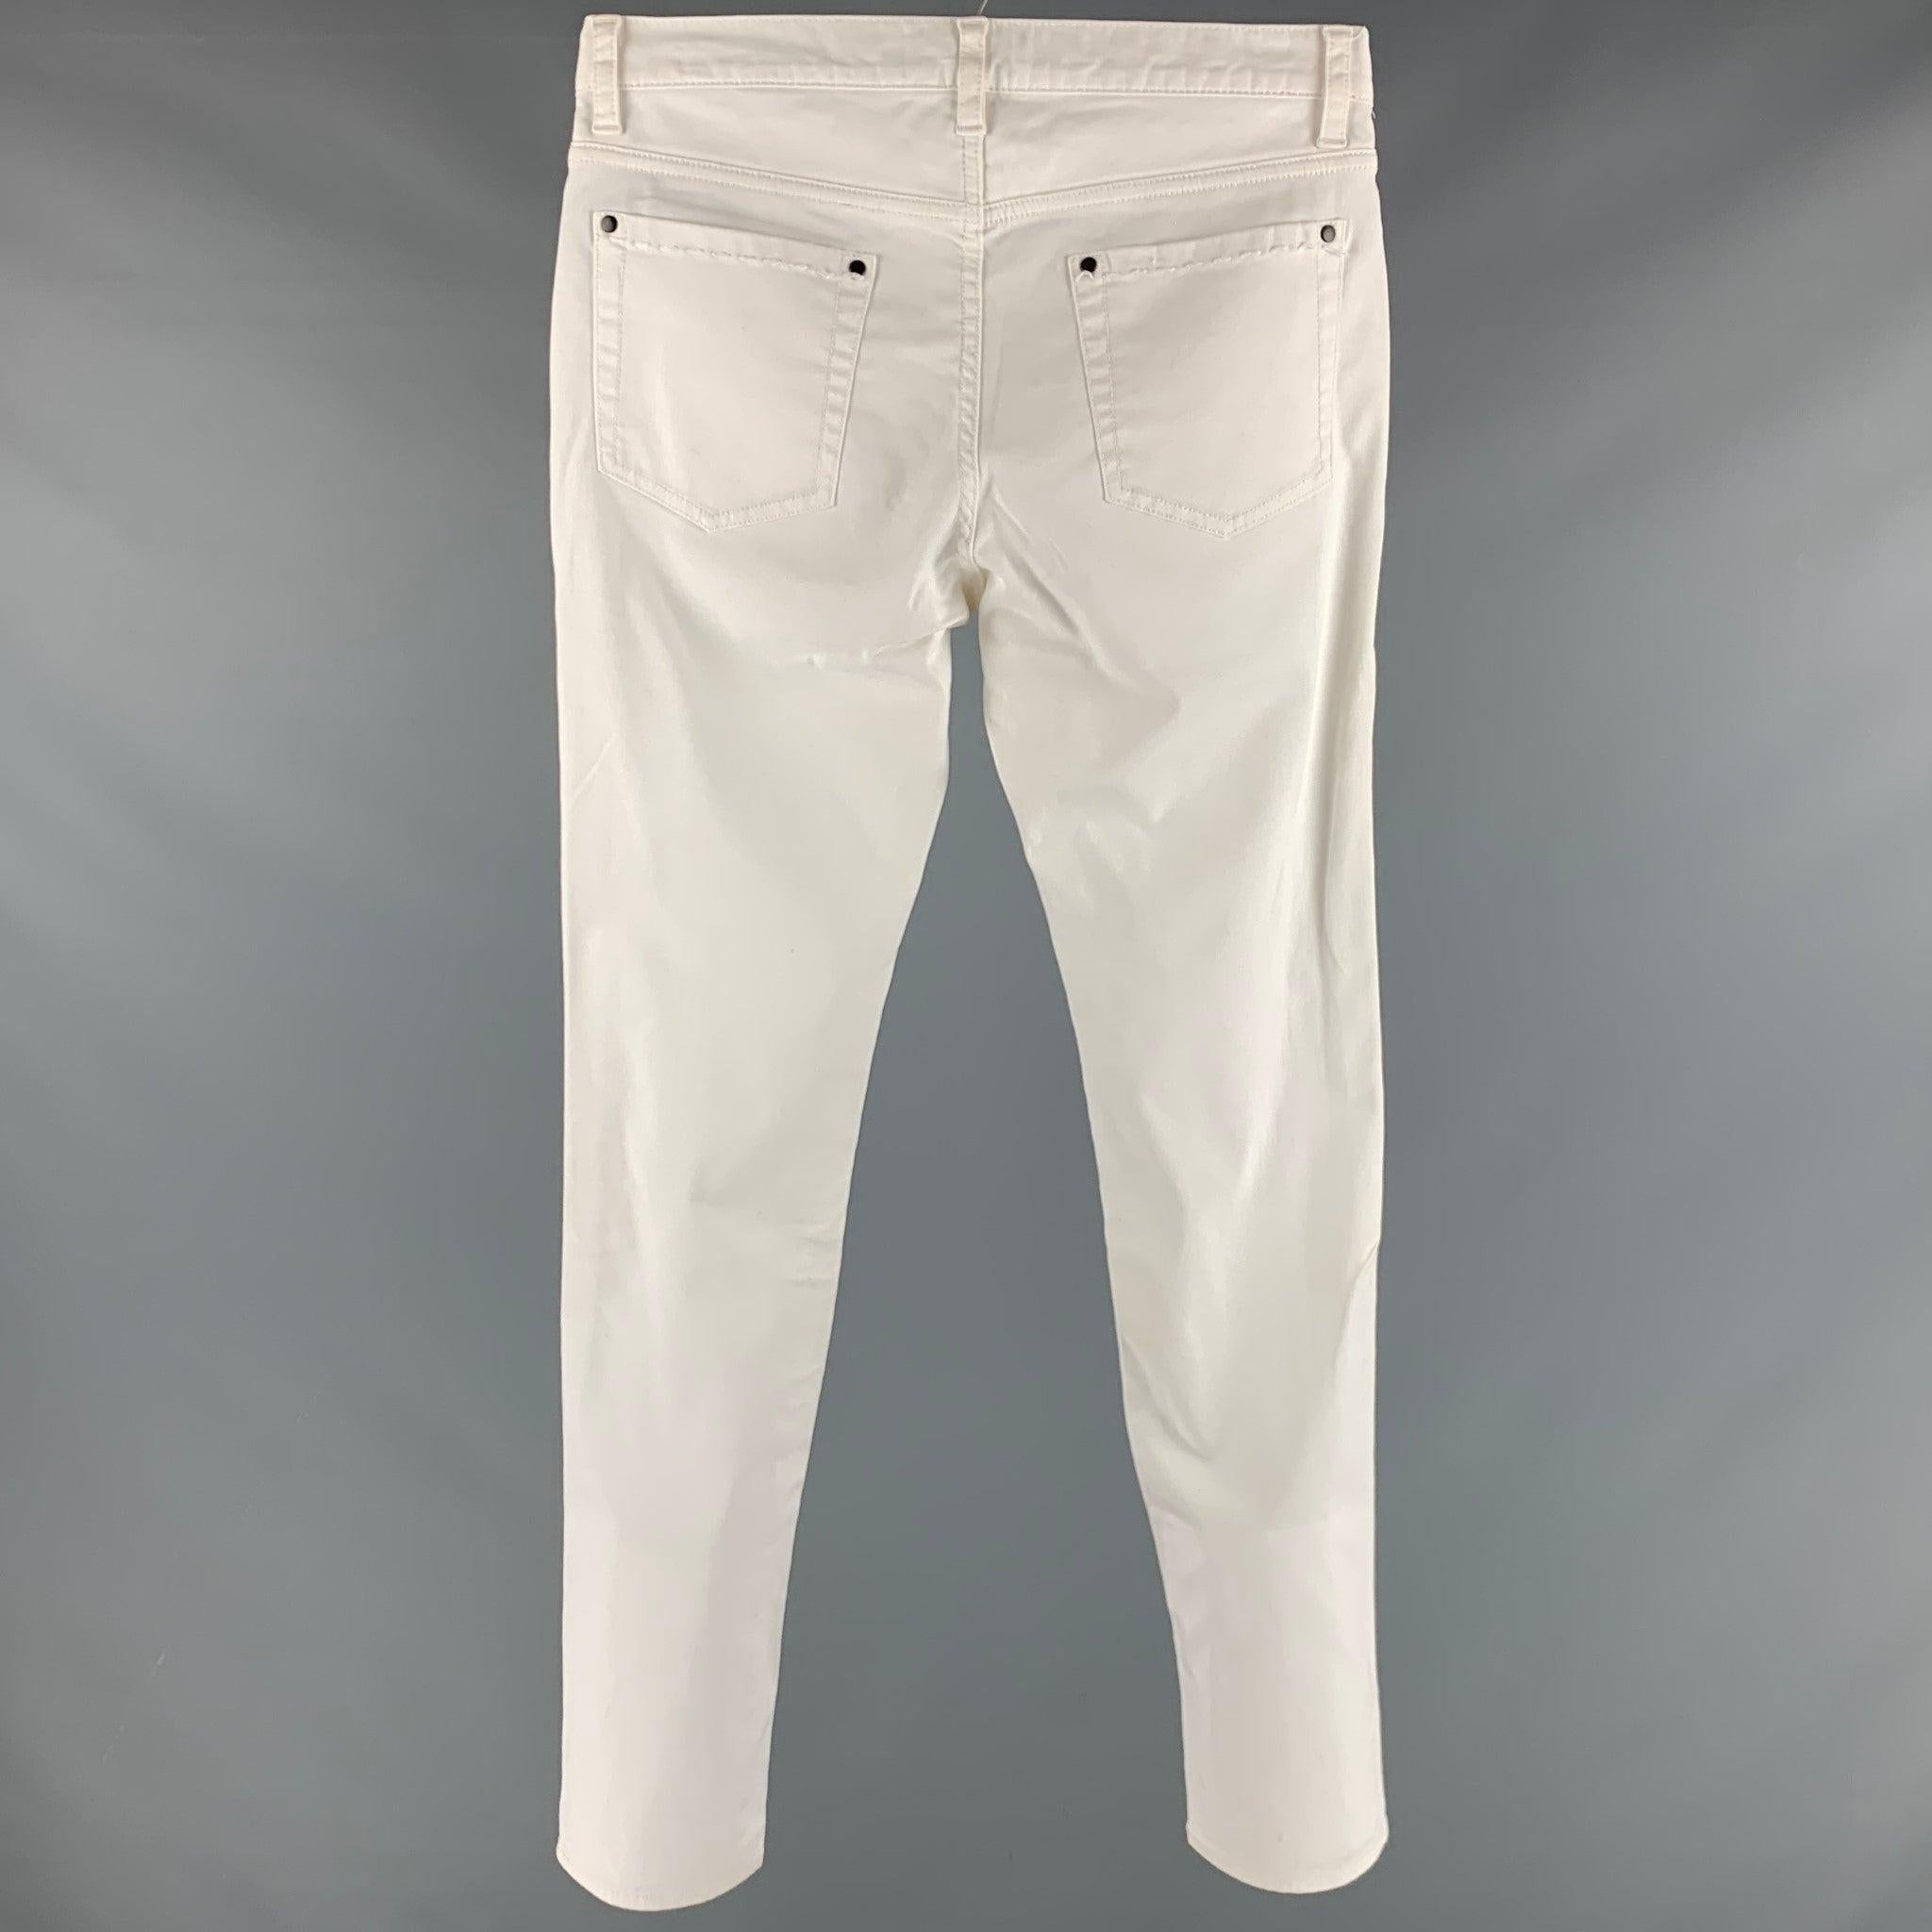 JOHN VARVATOS jeans
in an off white cotton blend fabric featuring five pockets style, running stitch details, and zip fly closure.Good Pre-Owned Condition. Moderate marks and signs of wear. 

Marked:   30RG 

Measurements: 
  Waist: 30 inches Rise: